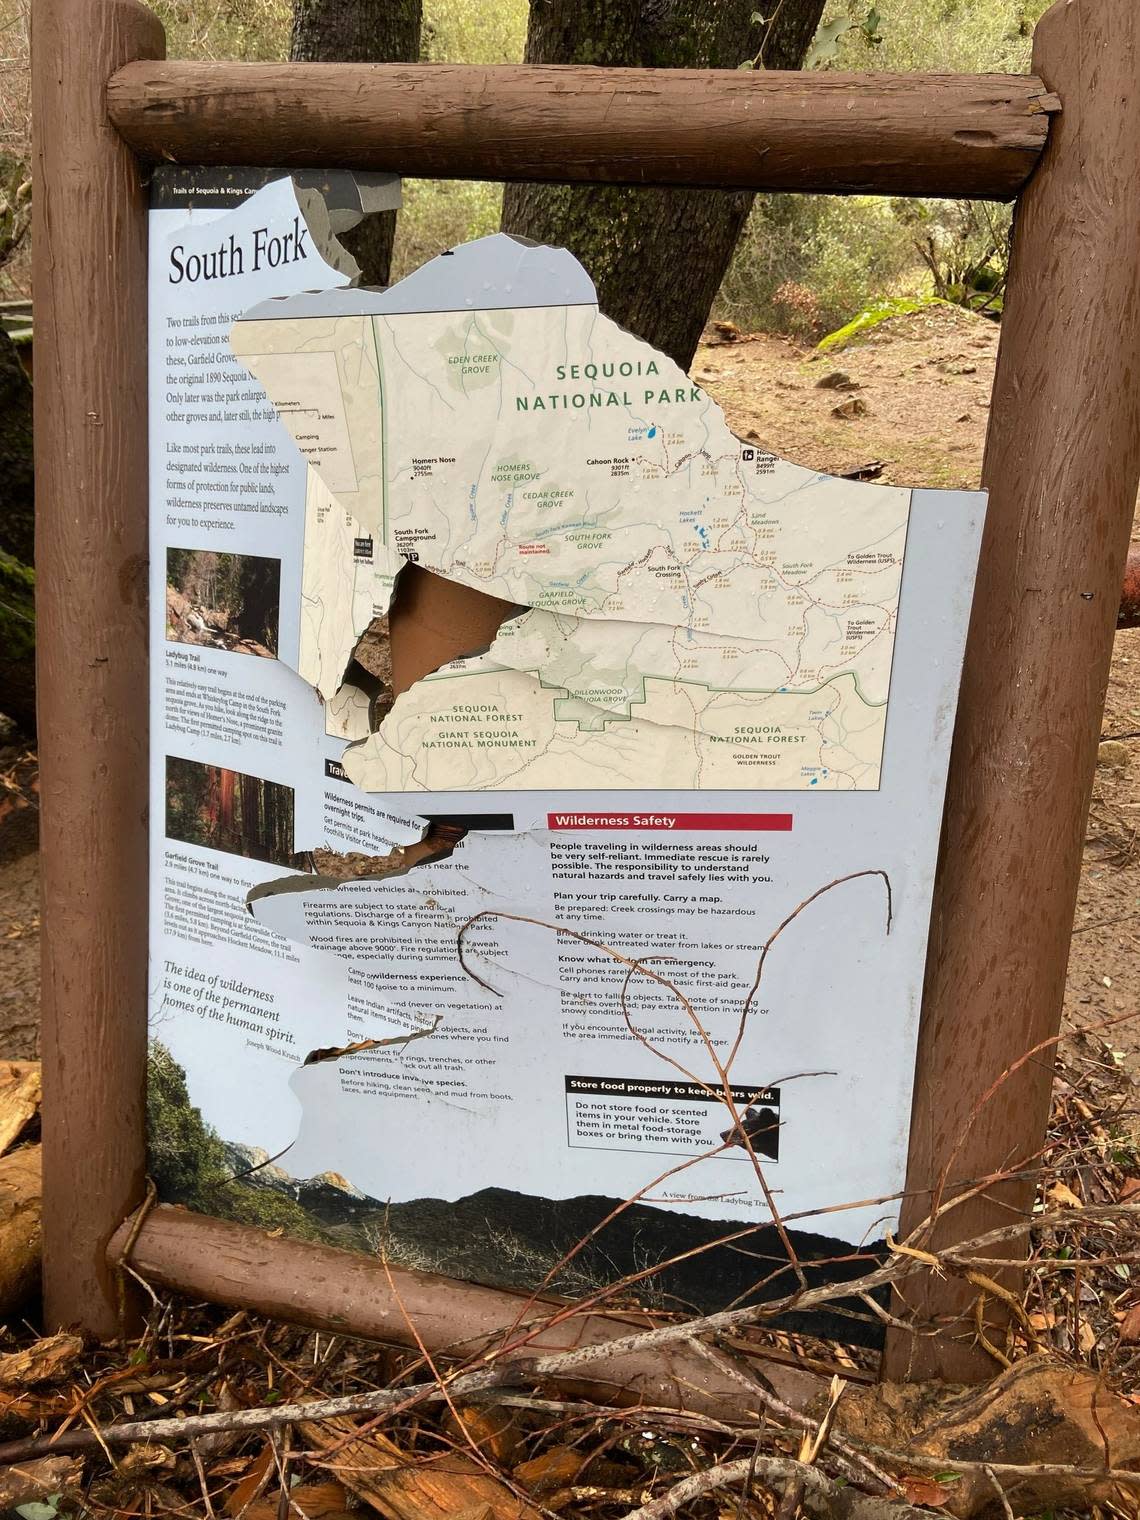 The broken Ladybug Trail trailhead sign following a January 2023 flood that overwhelmed the South Fork area of California’s Sequoia National Park.